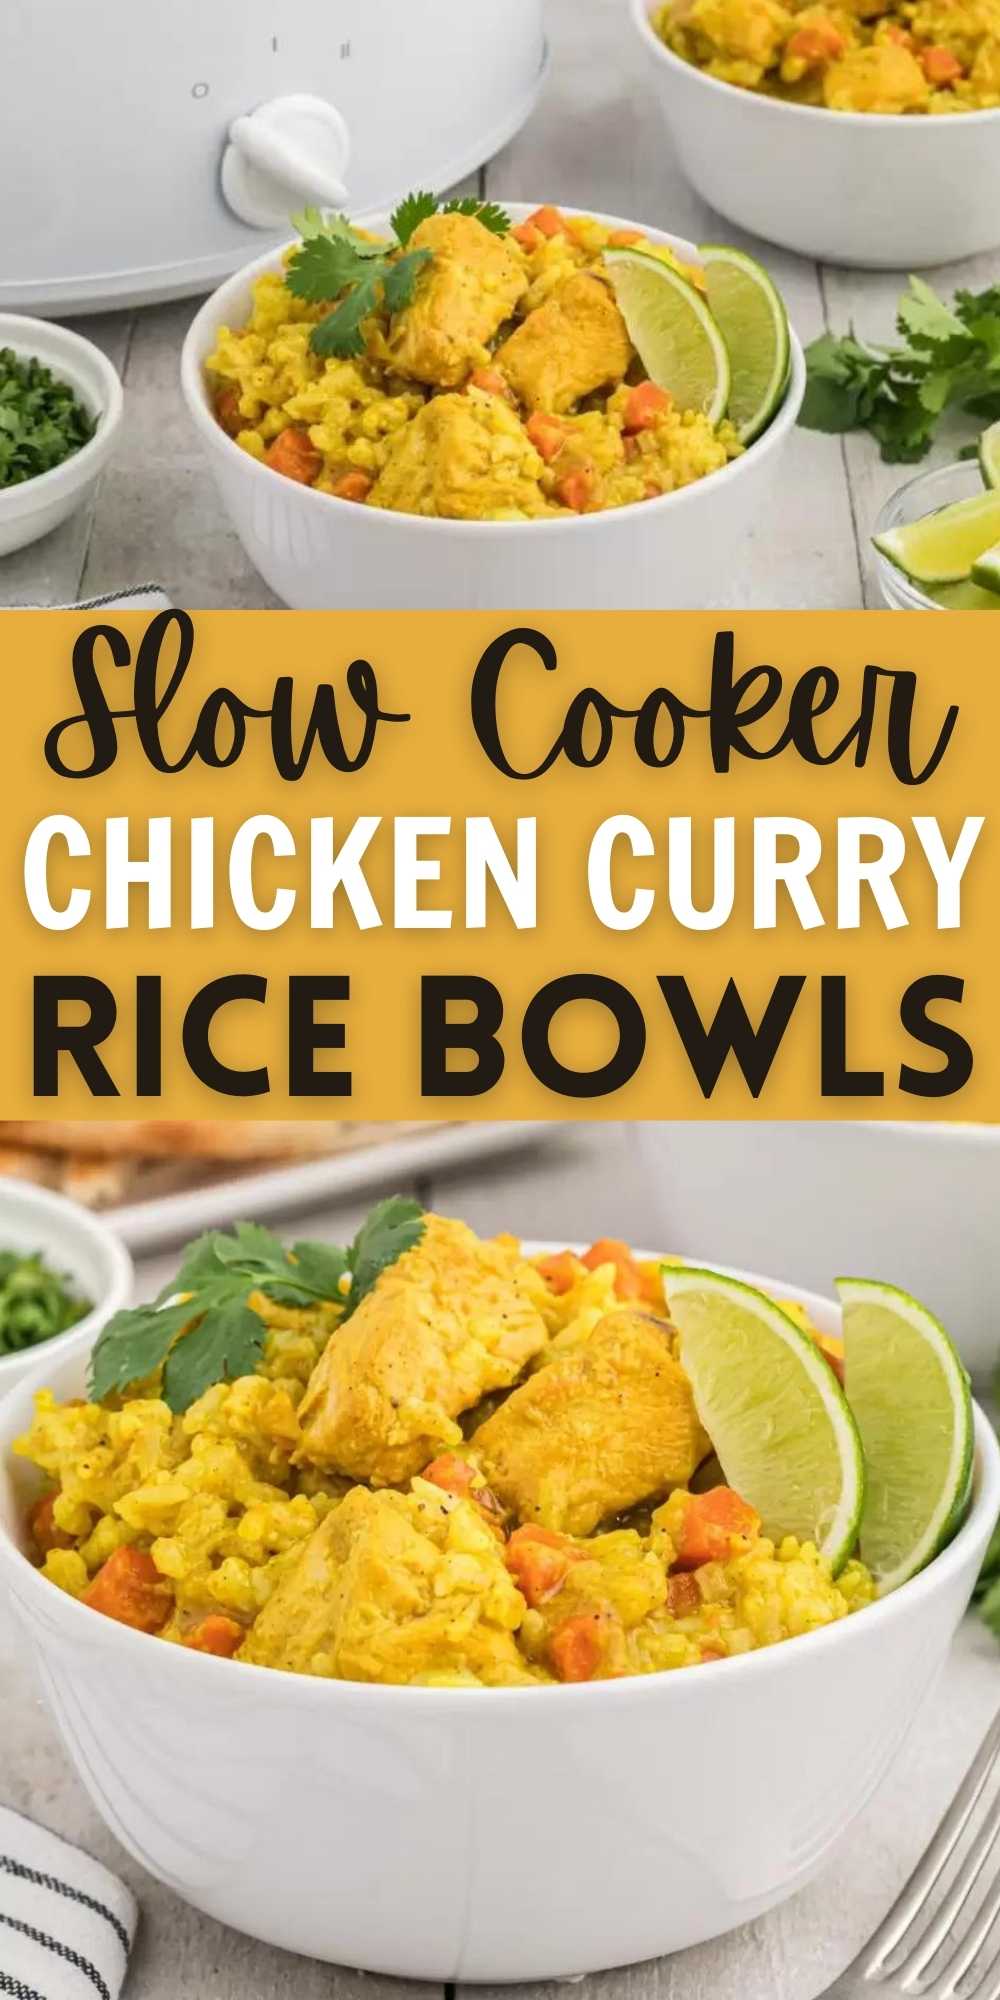 Enjoy all the flavors of chicken curry when you make this Chicken Curry Rice Bowl. Toss everything into the slow cooker and come home to a great dinner. Crock Pot Chicken Curry with Rice is delicious and easy to make in your favorite slow cooker. #eatingonadime #curryrecipes #crockpotrecipes #slowcookerrecipes #chickenrecipes 
